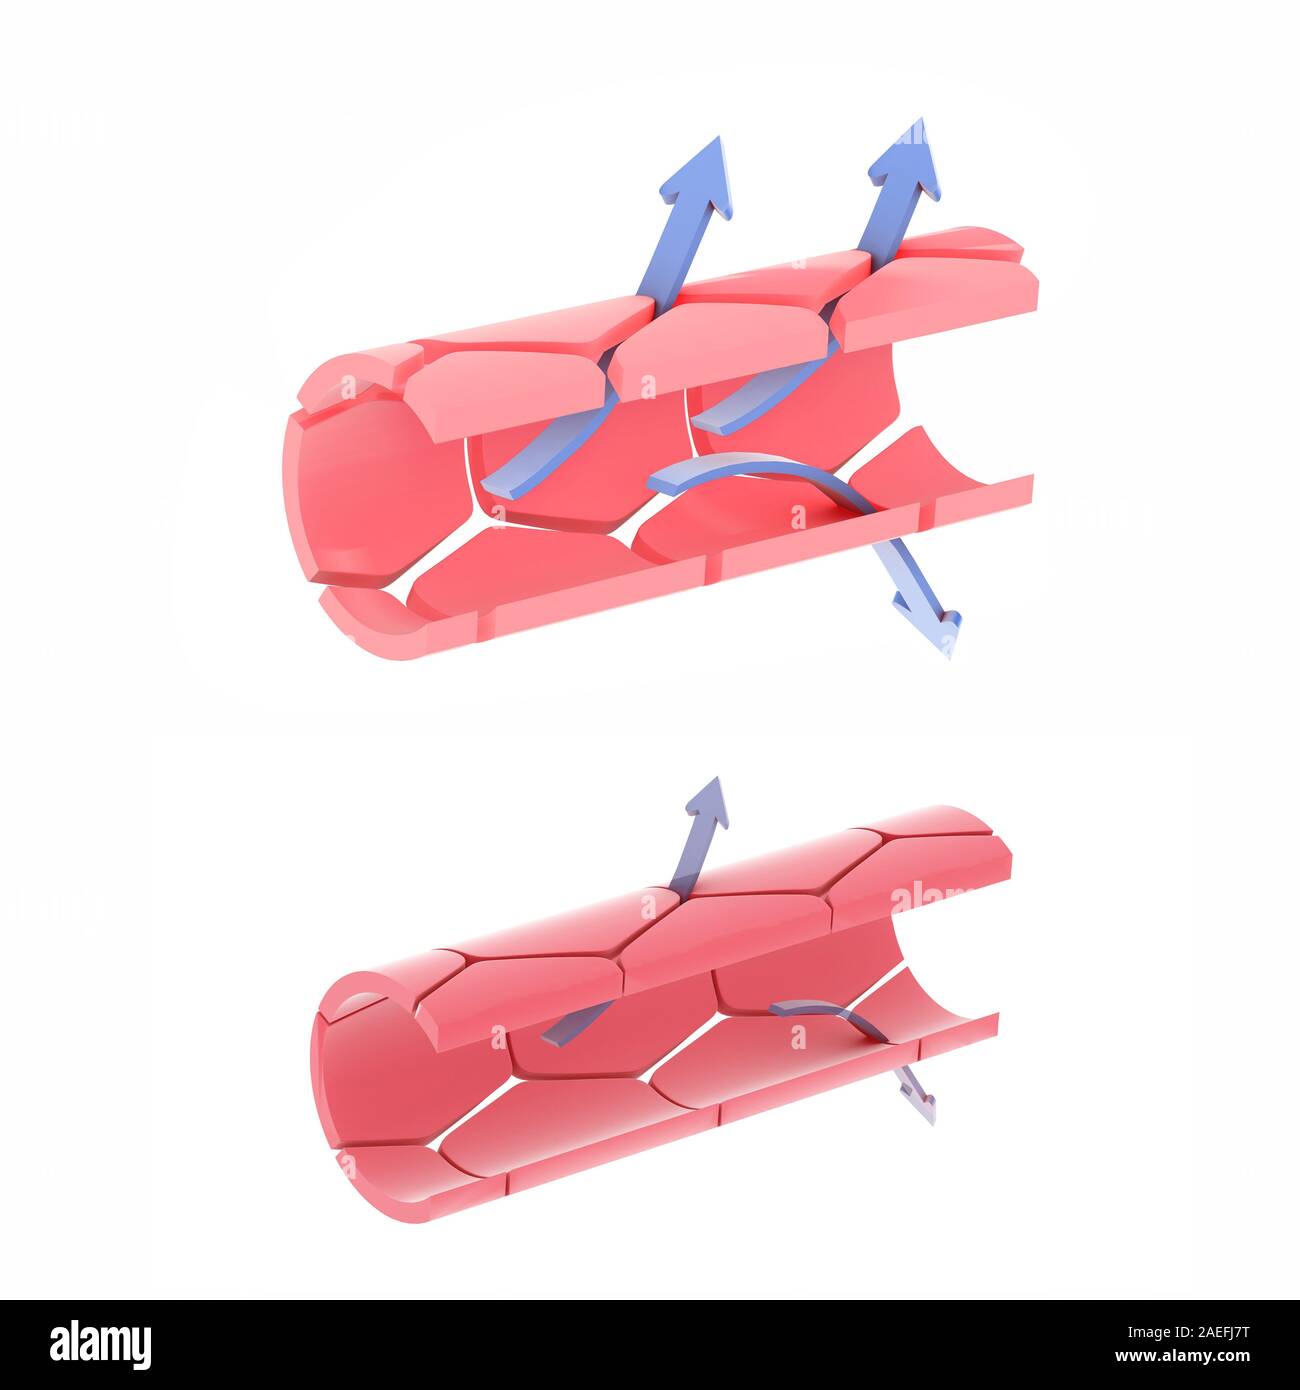 3D illustration of capillaries, arteries, more open or more closed. Showing the exchange of oxygen and nutrients. Stock Photo